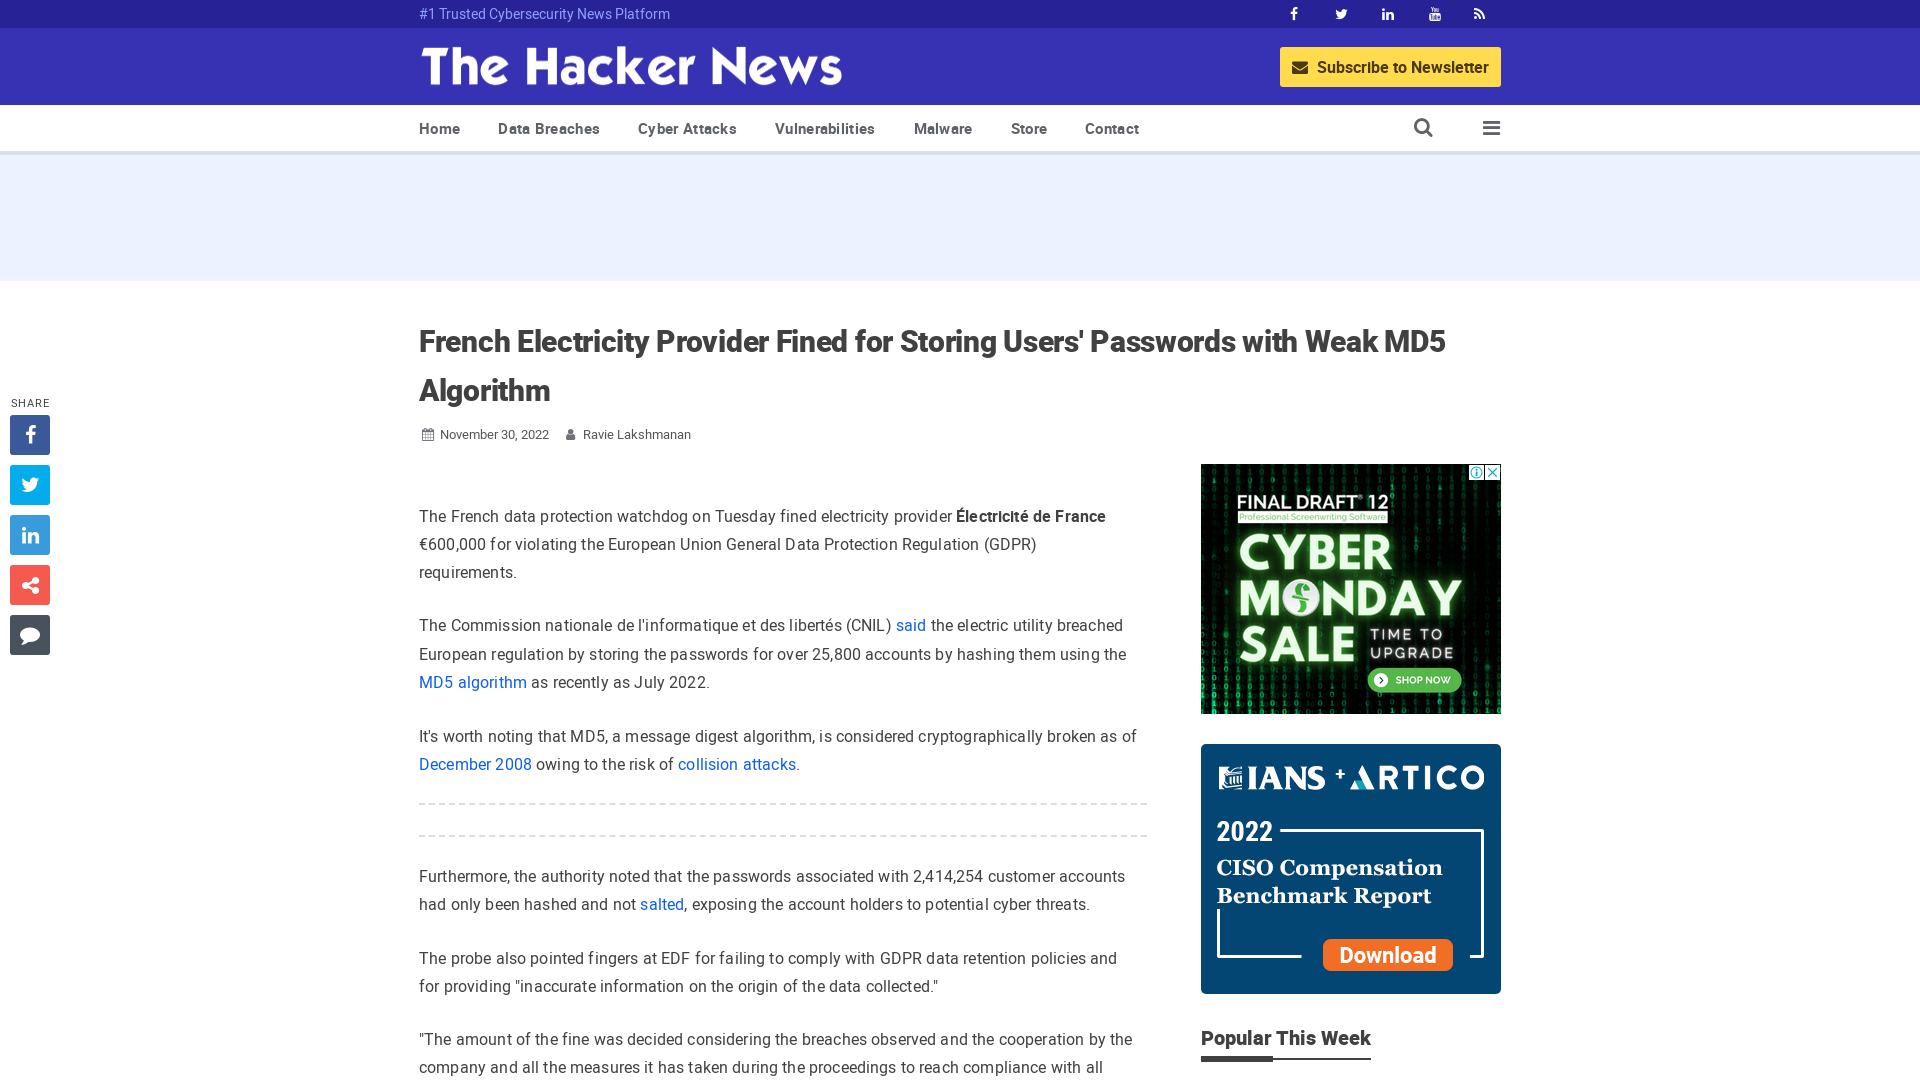 French Electricity Provider Fined for Storing Users' Passwords with Weak MD5 Algorithm